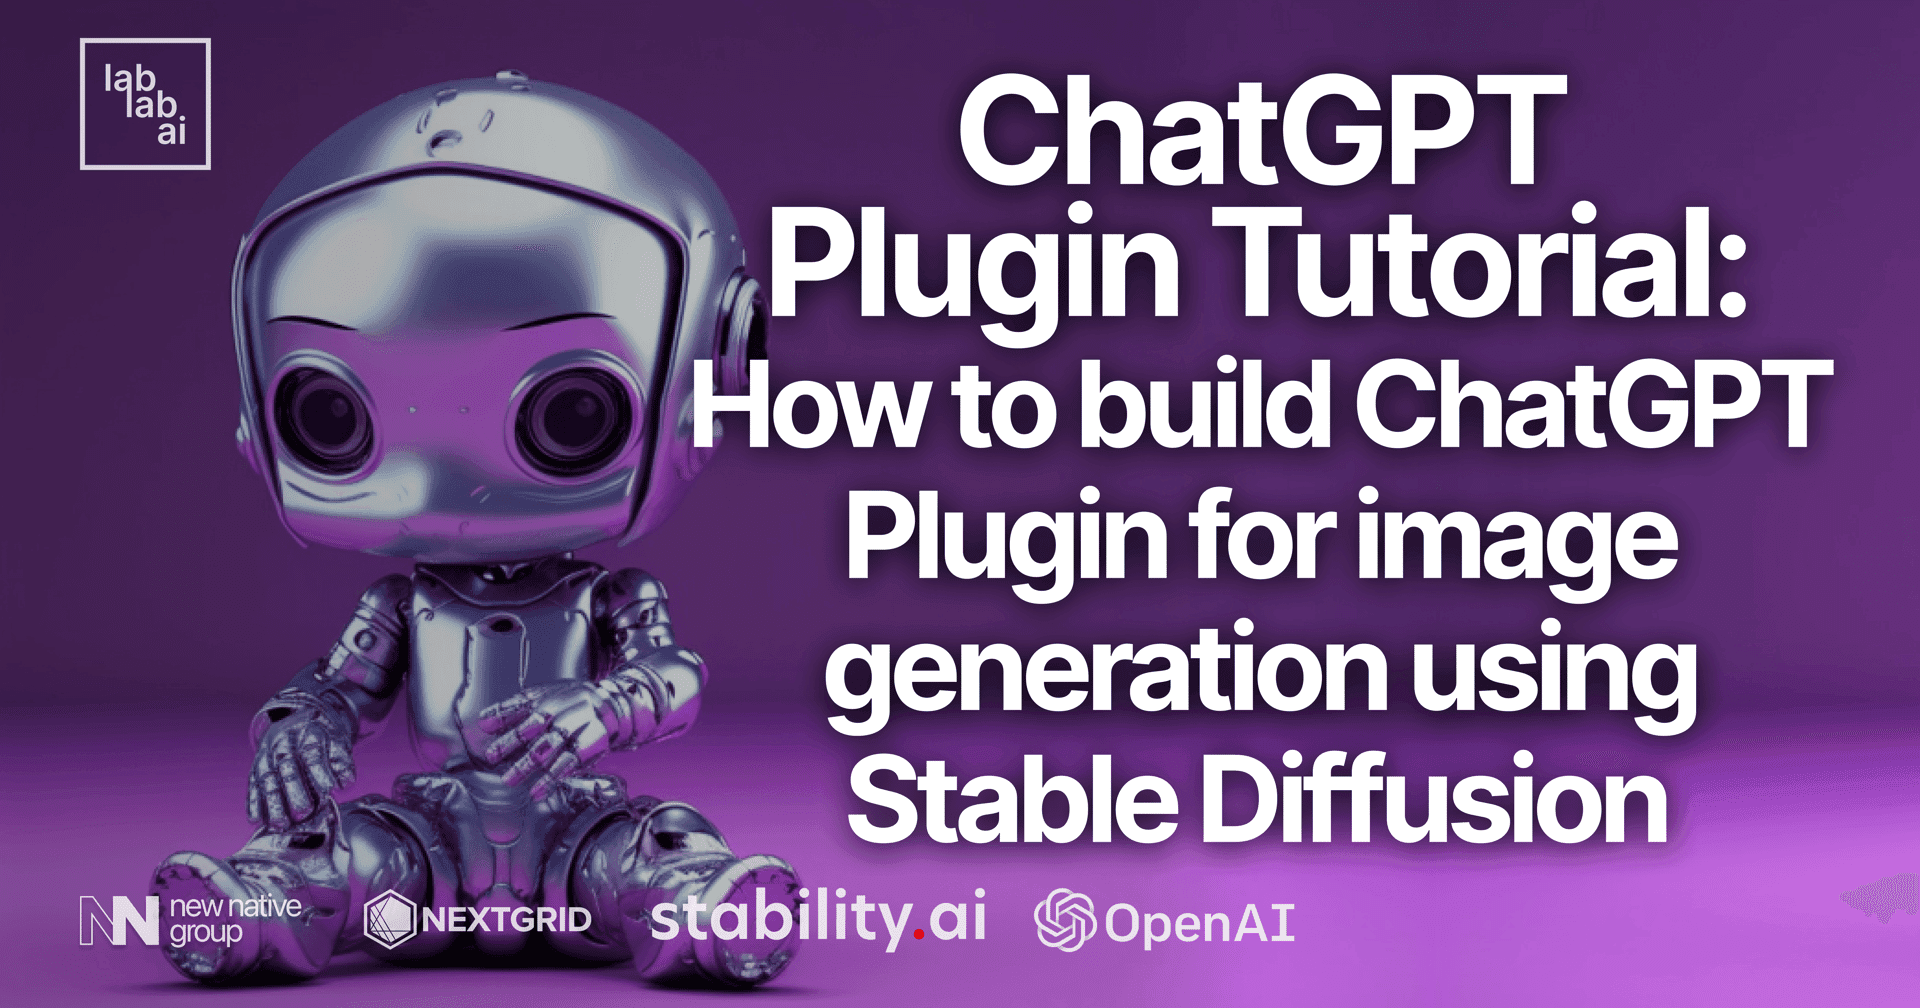 ChatGPT Plugin Tutorial: How to build ChatGPT Plugin for image generation using Stable Diffusion